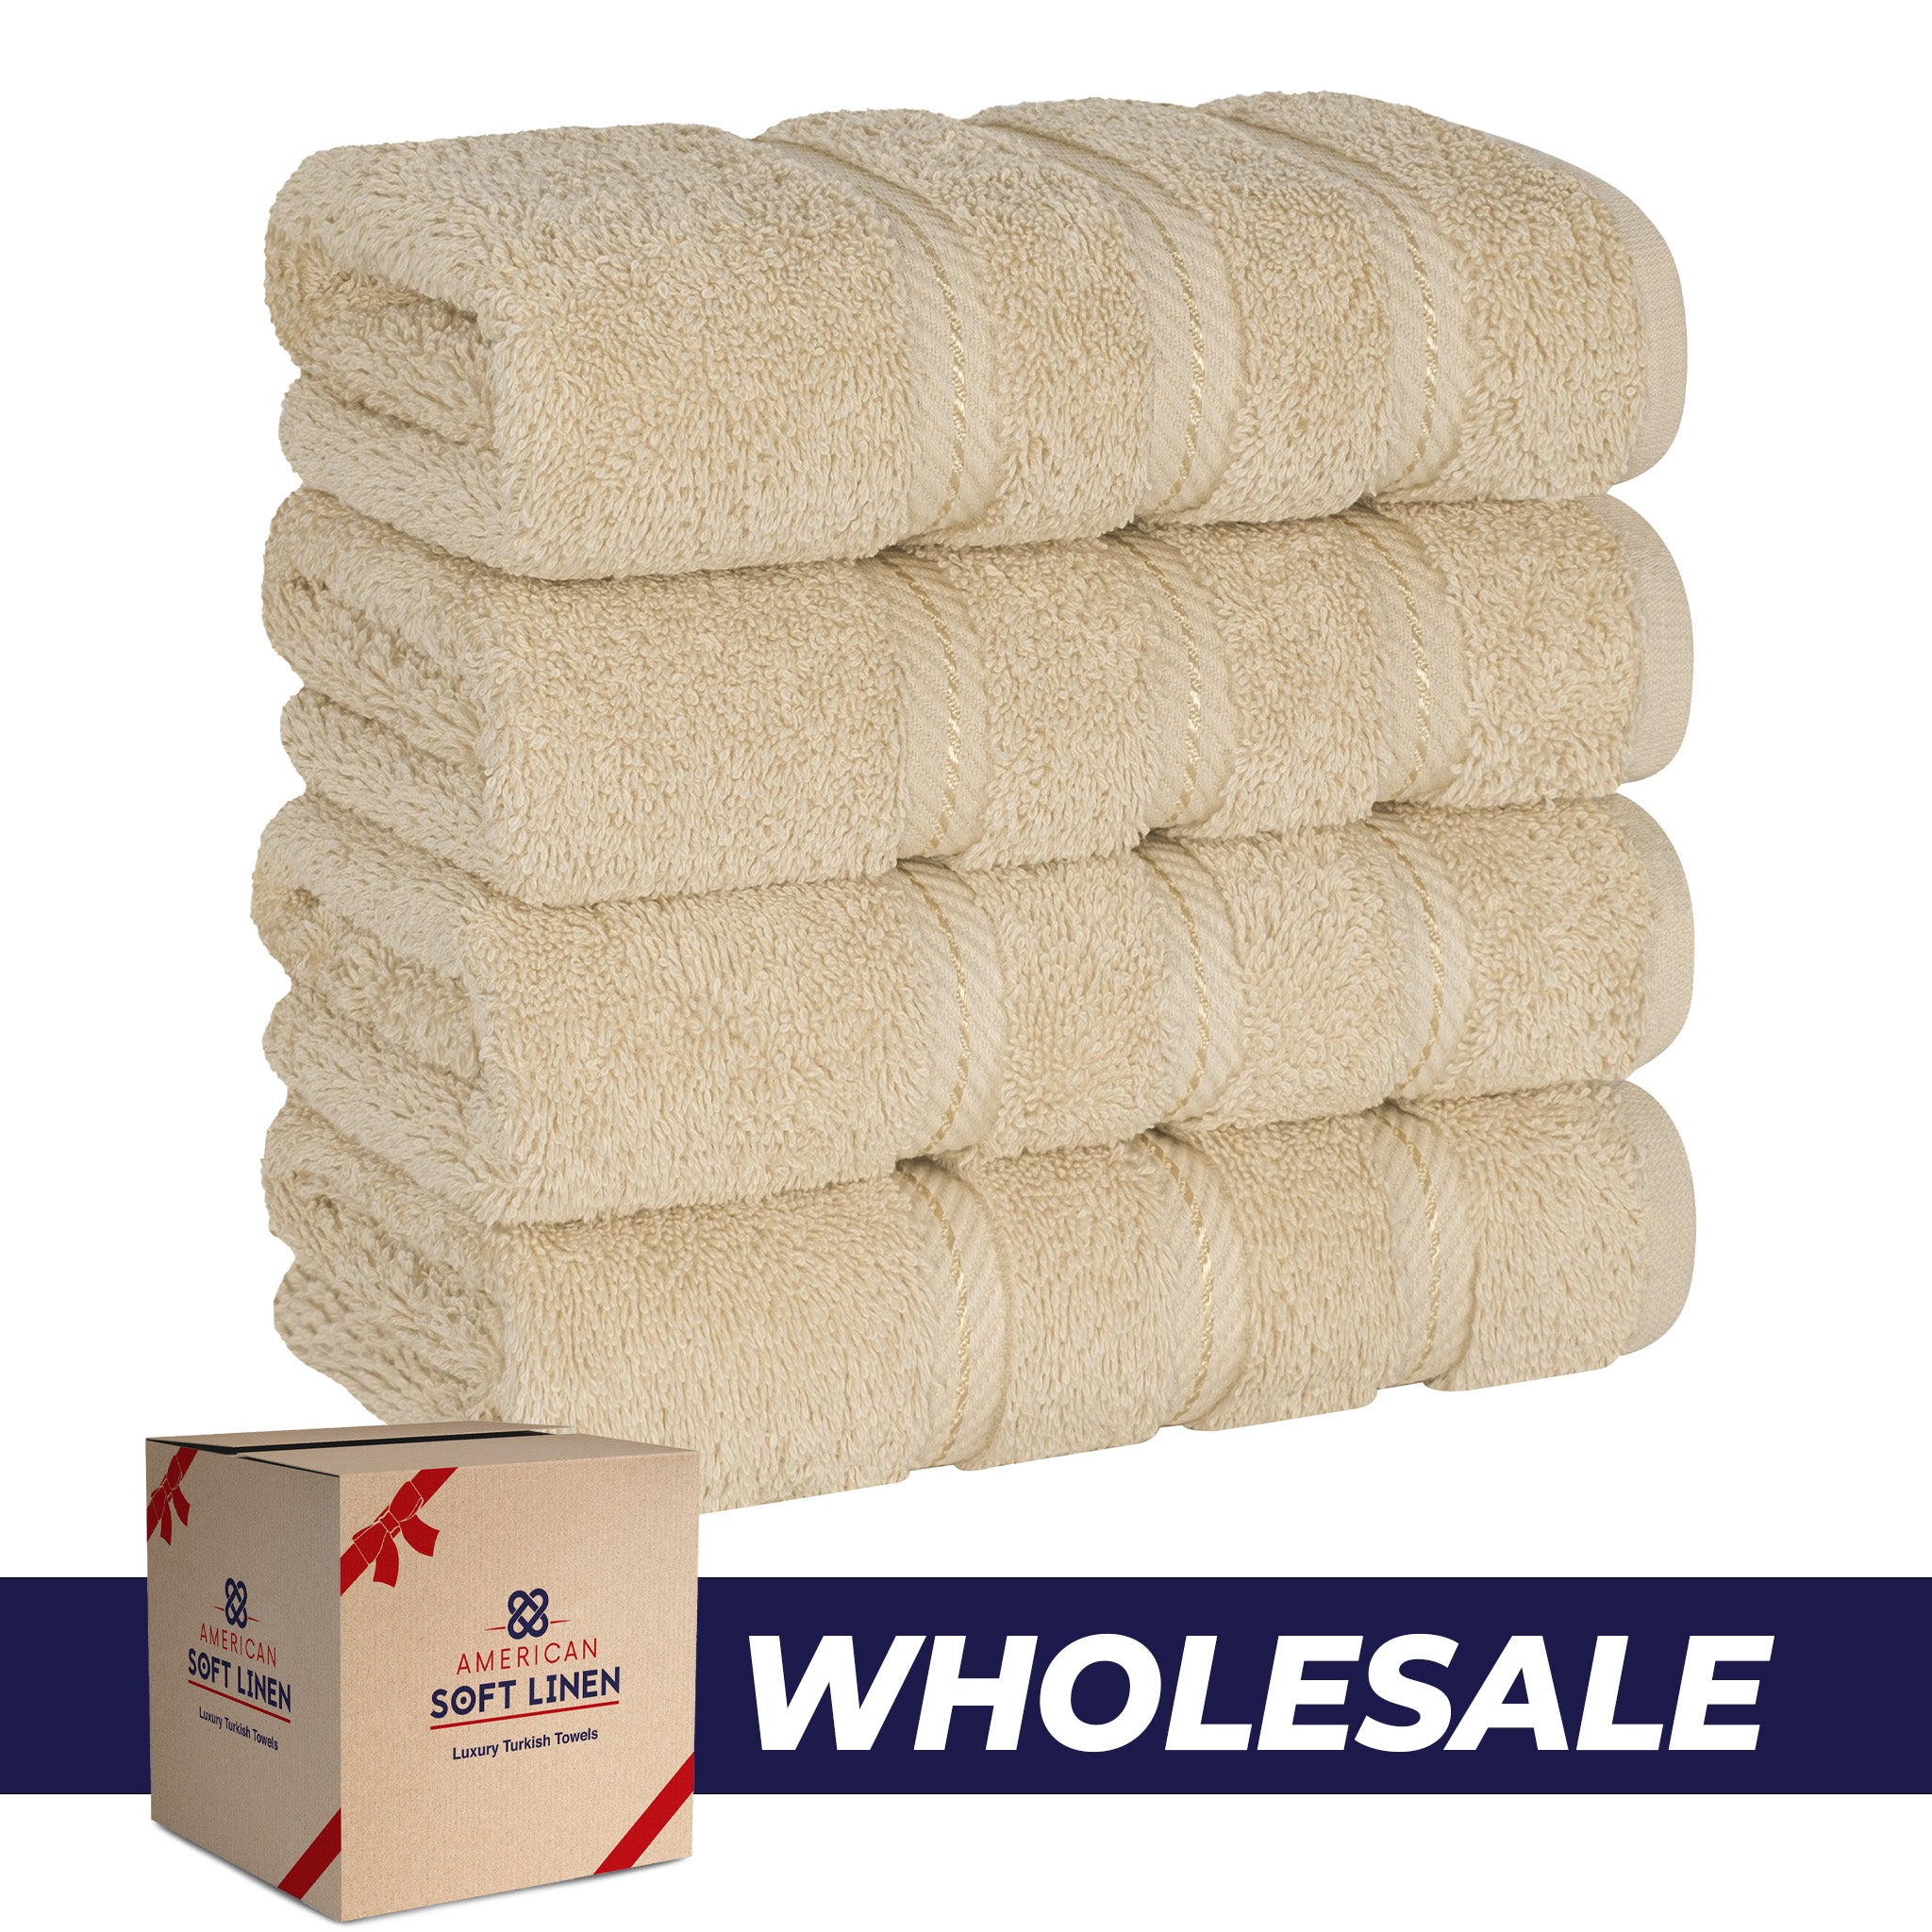 American Soft Linen 100% Turkish Cotton 4 Pack Hand Towel Set Wholesale sand-taupe-0